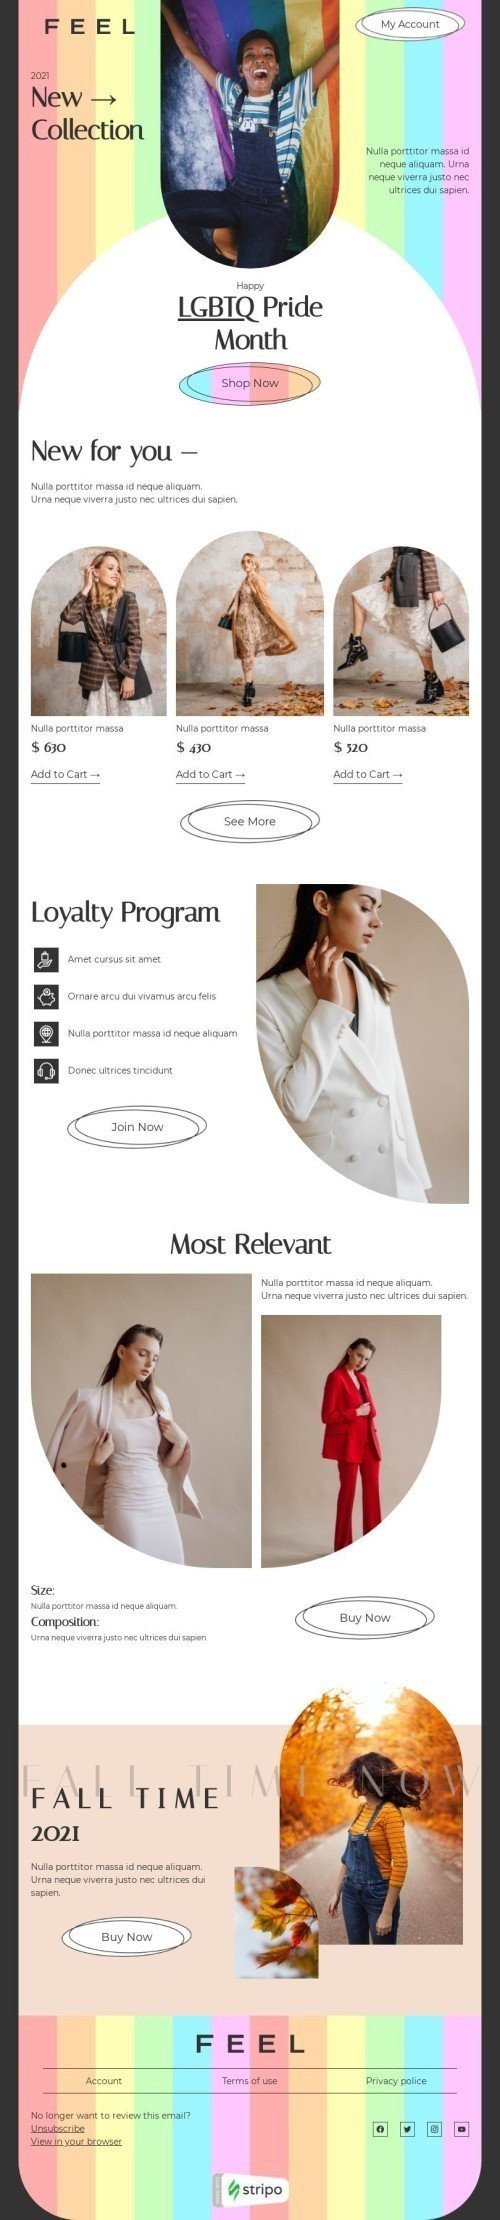 LGBTQ Pride Month Email Template "New for you" for Fashion industry mobile view